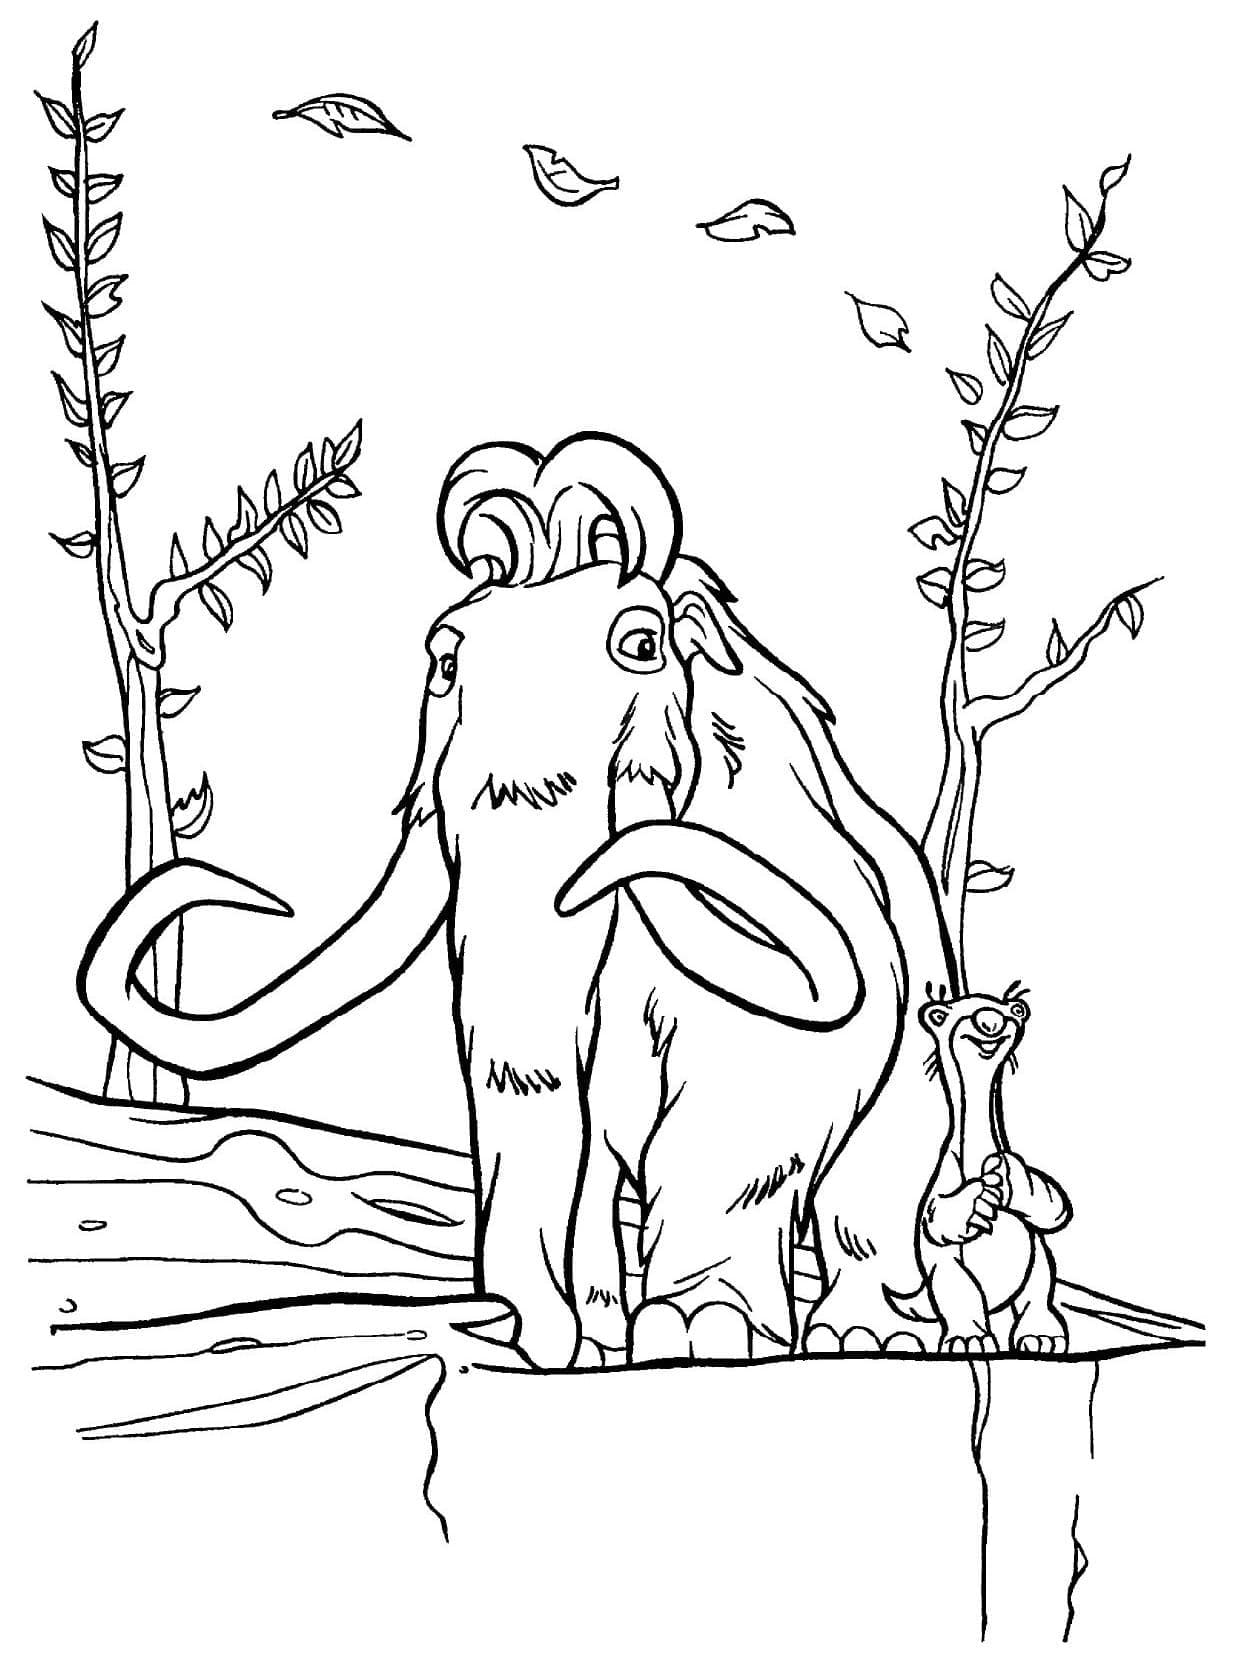 Manny et Sid coloring page